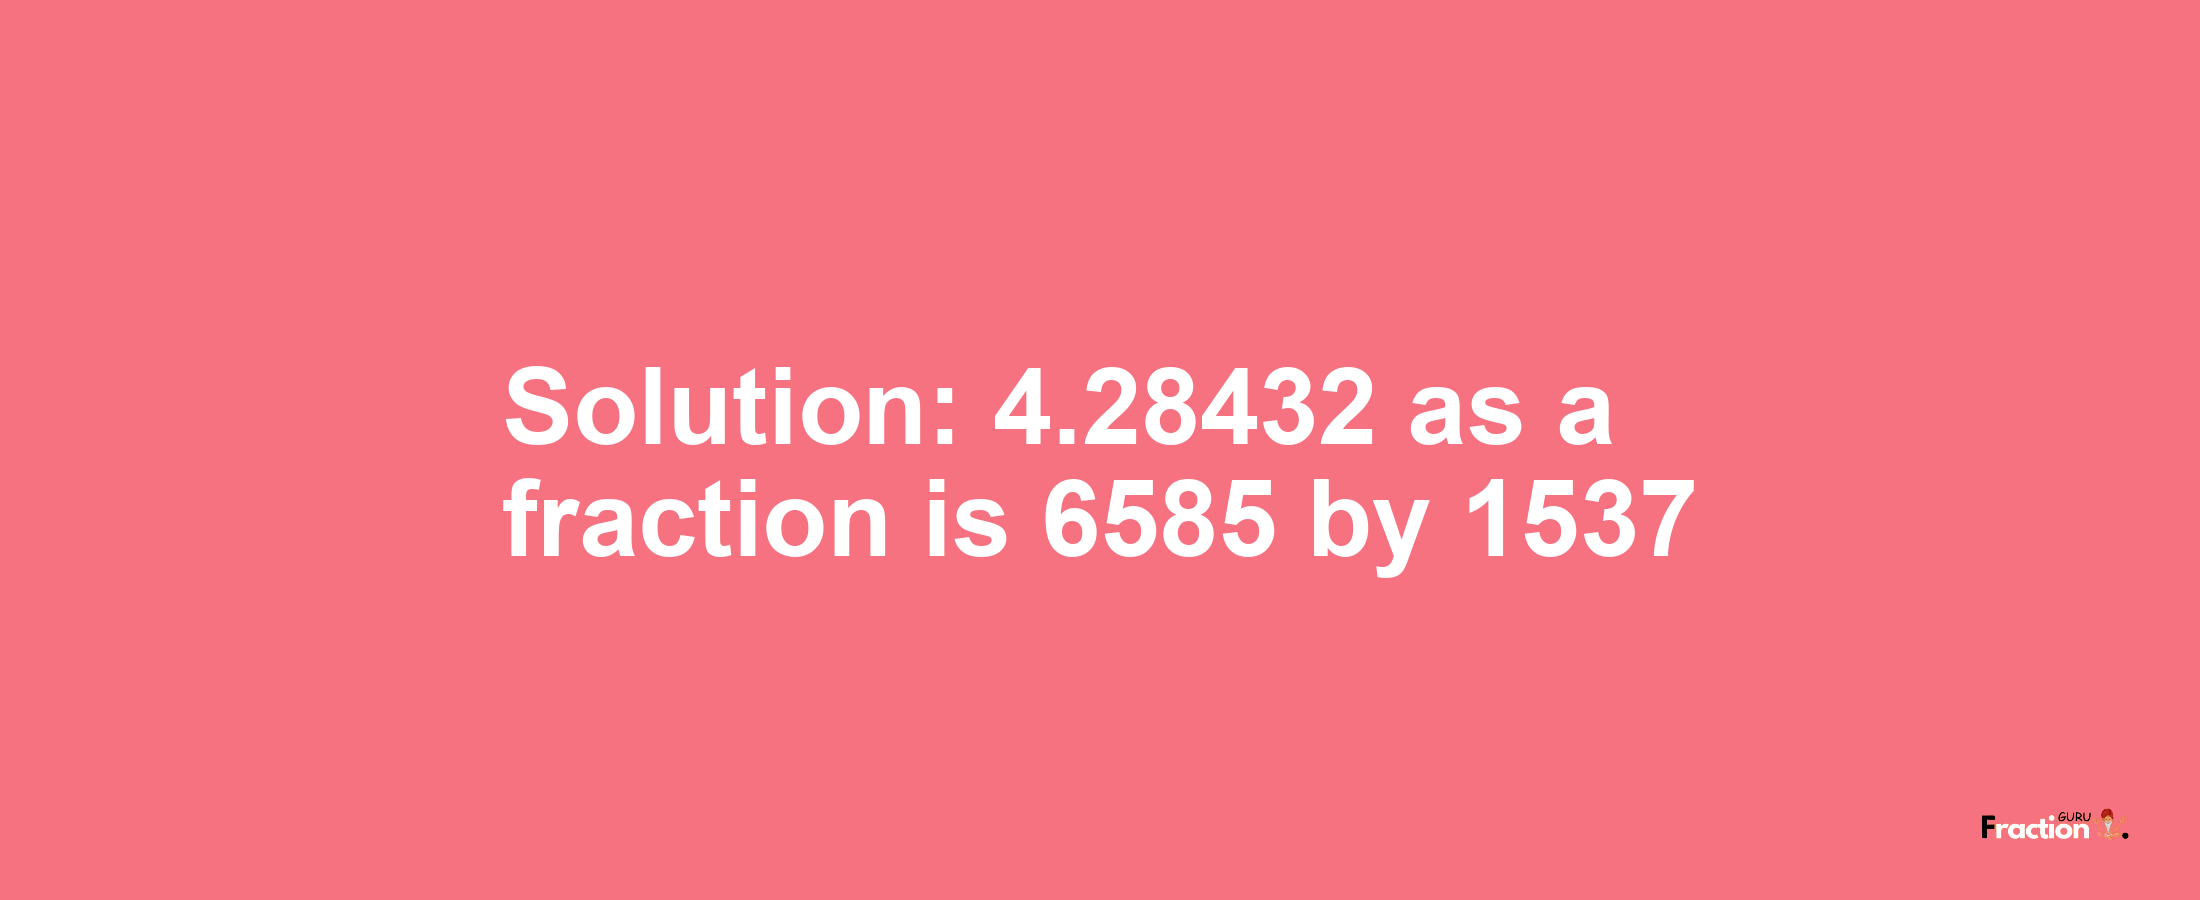 Solution:4.28432 as a fraction is 6585/1537